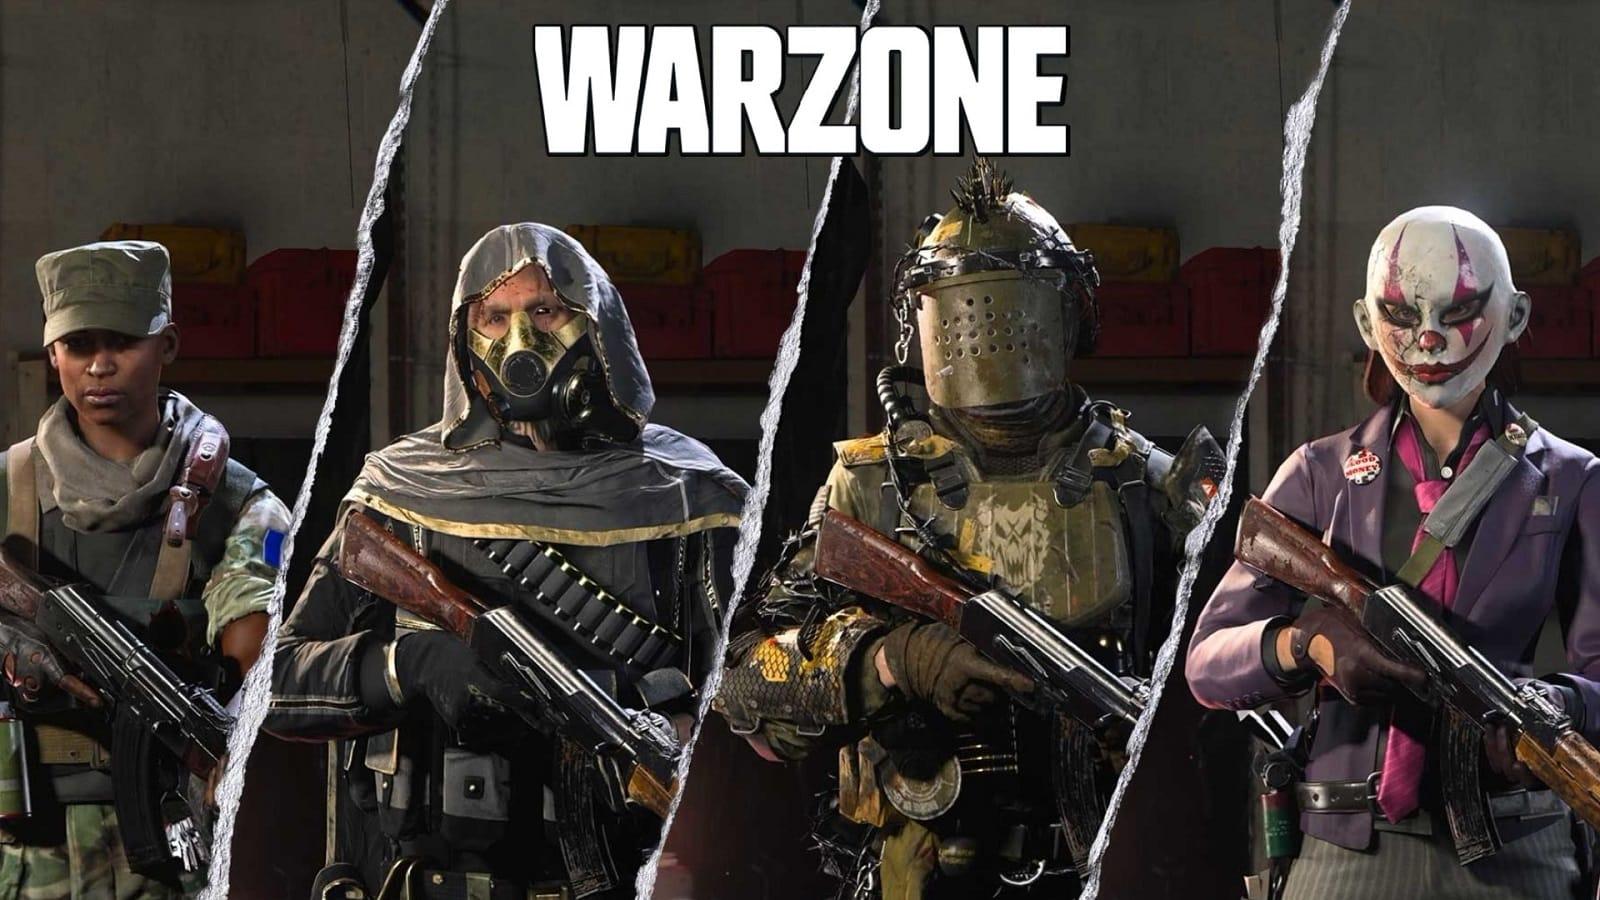 Will Warzone skins and Operators transfer to Warzone 2? - Dexerto